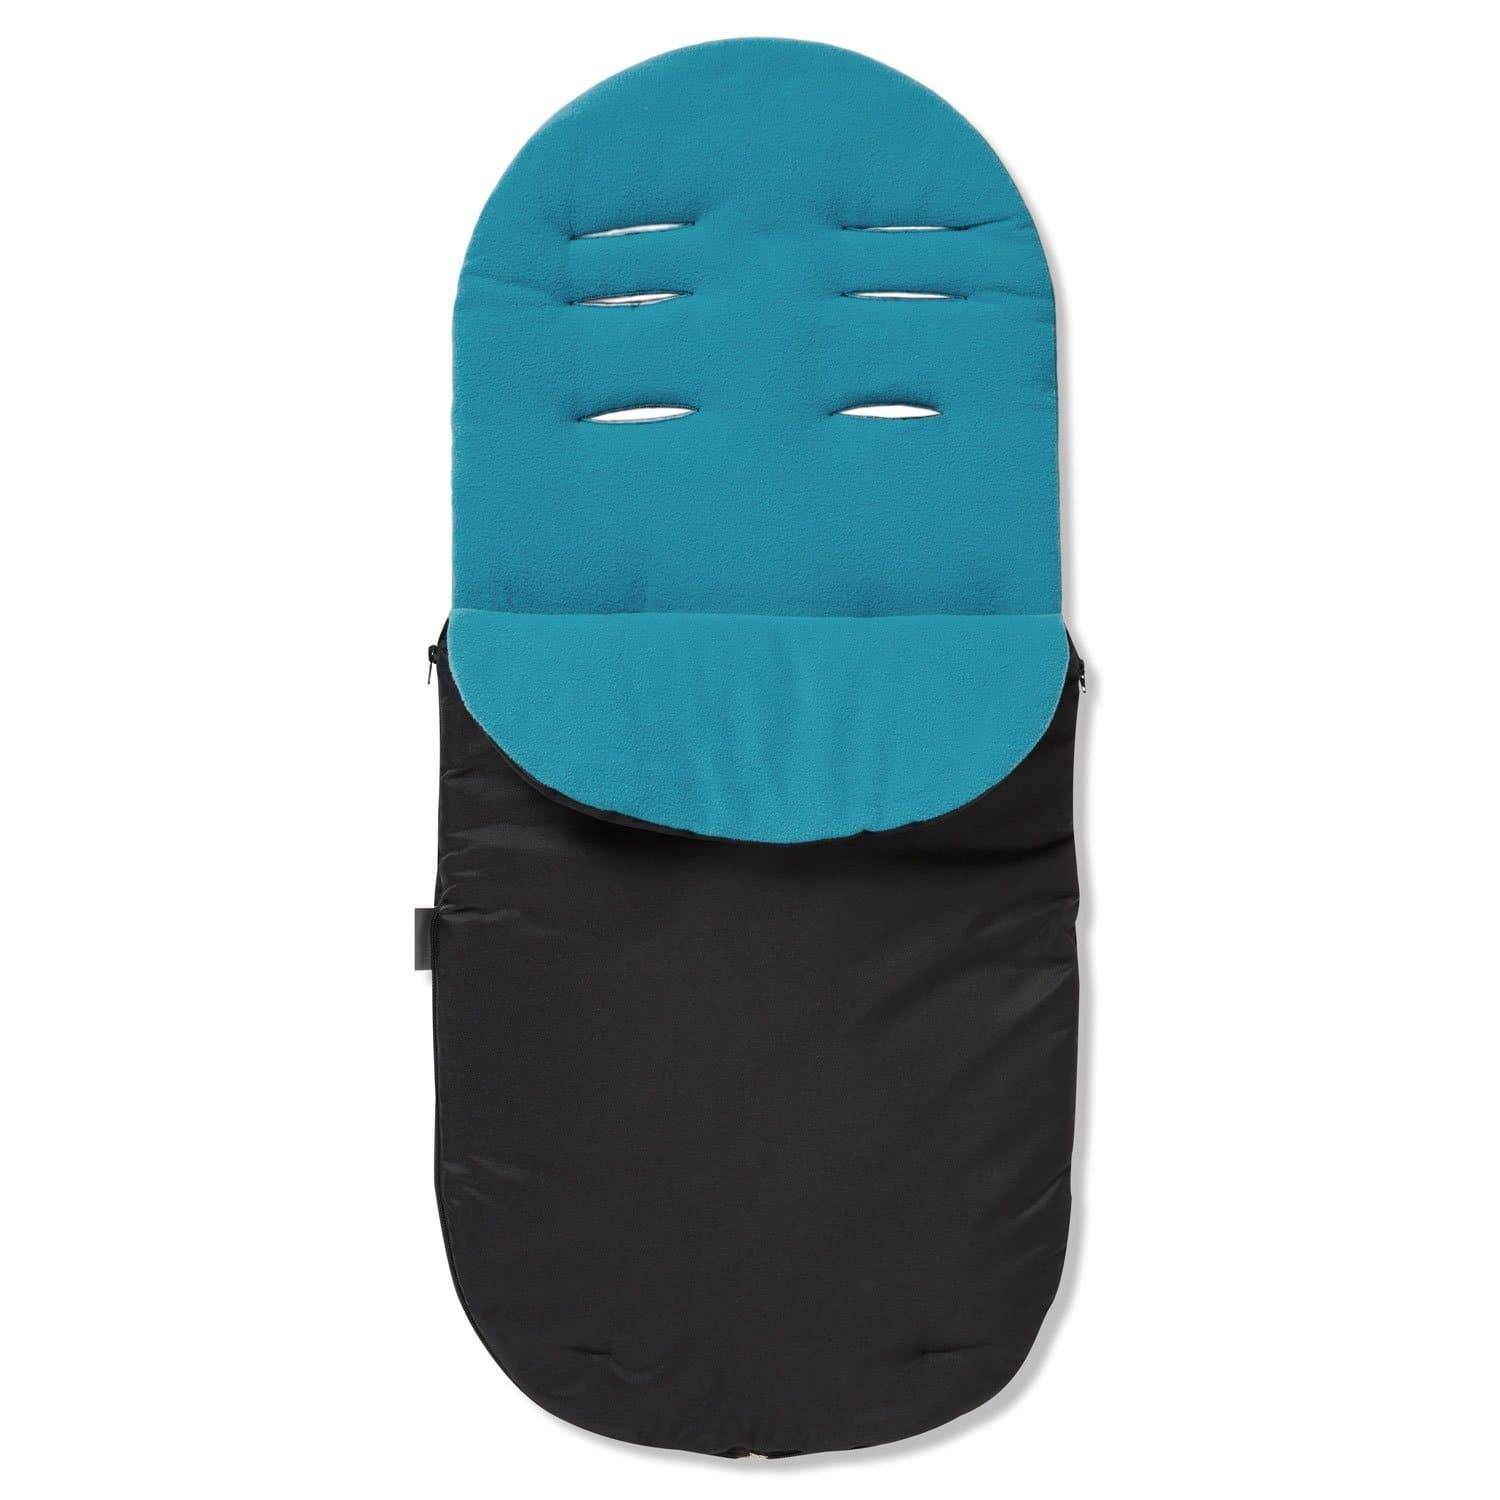 Footmuff / Cosy Toes Compatible with Greentom - Turquoise / Fits All Models | For Your Little One